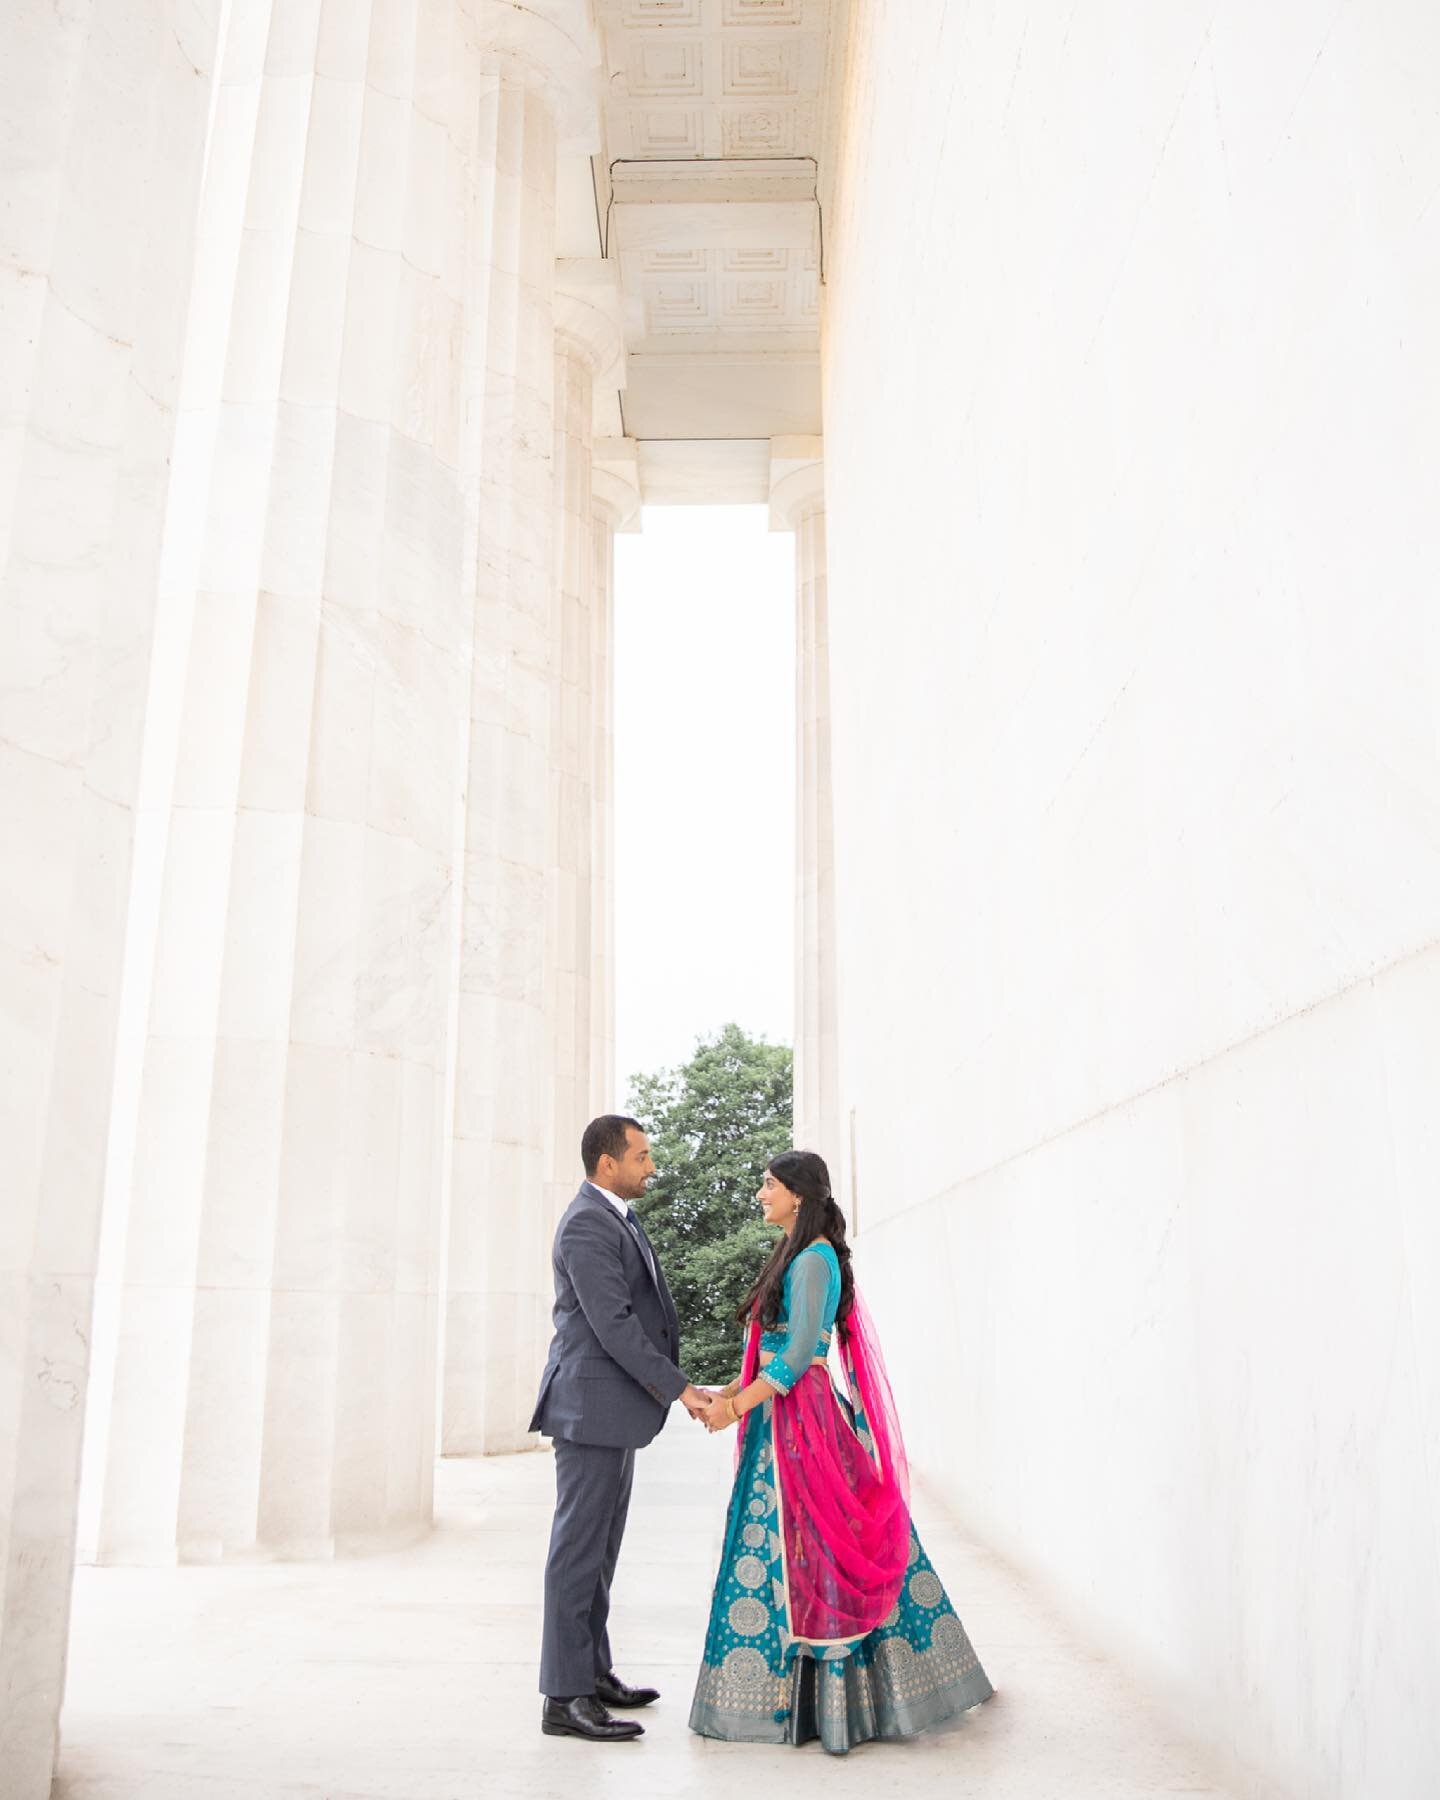 Introducing the artists behind the lens!! Shiji and Neethu are a husband and wife team based in Northern Virginia. Visit the link in bio or www.theblushinglotus.com to keep up with the latest.  #dcphotographers #dmvphotographers #followtheminnu #tiet